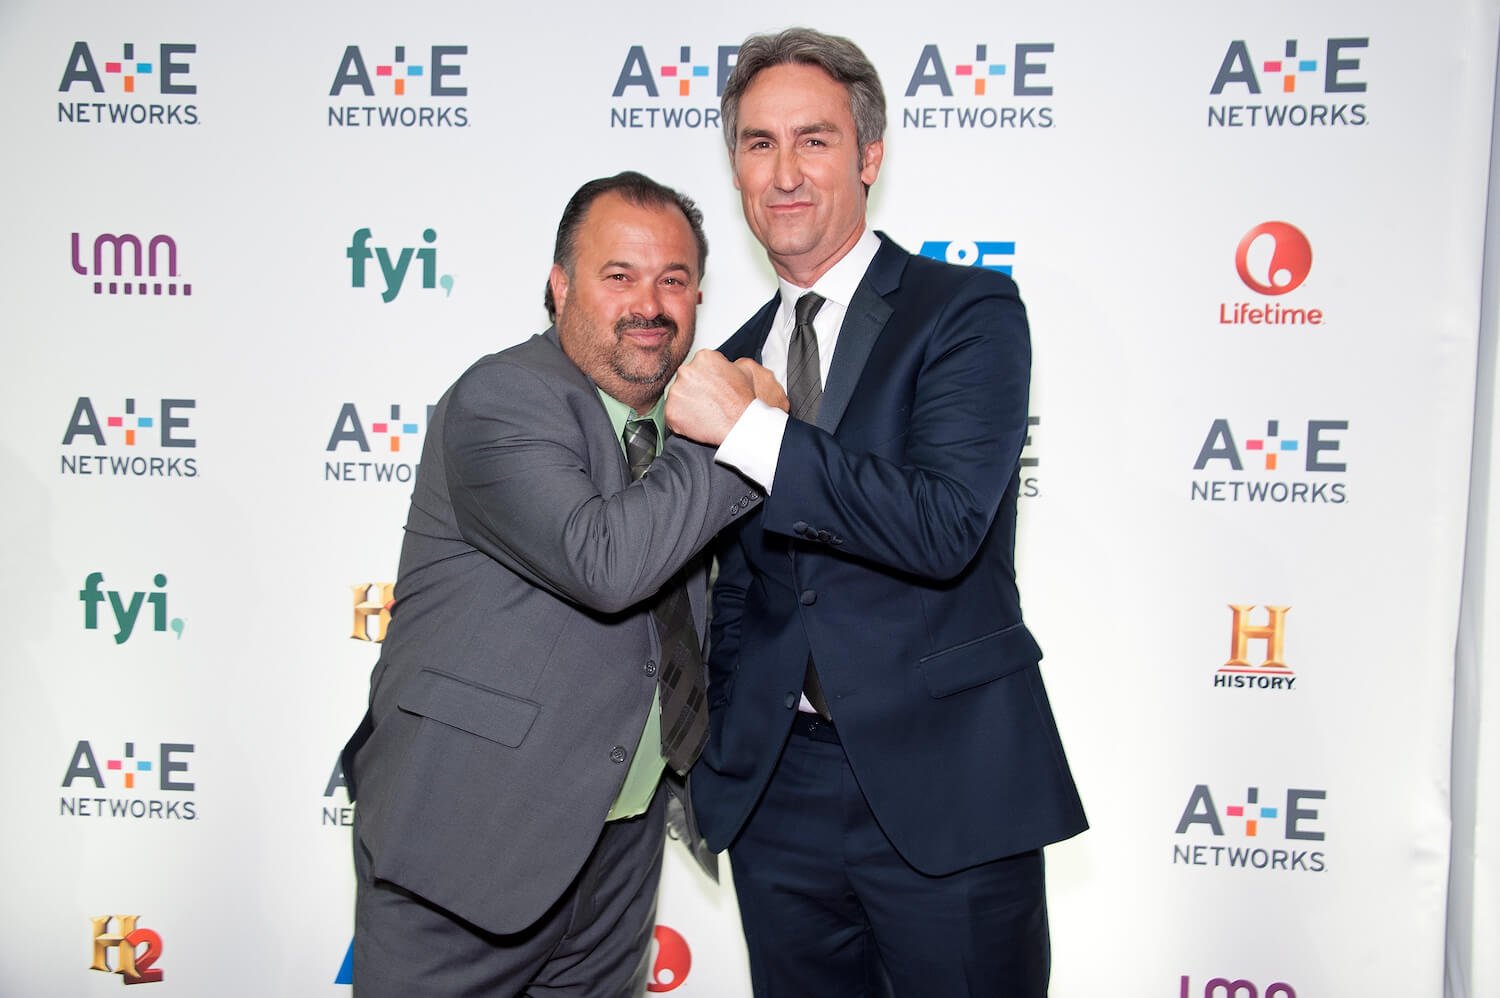 Frank Fritz and Mike Wolfe from 'American Pickers' in suits and ties at an event